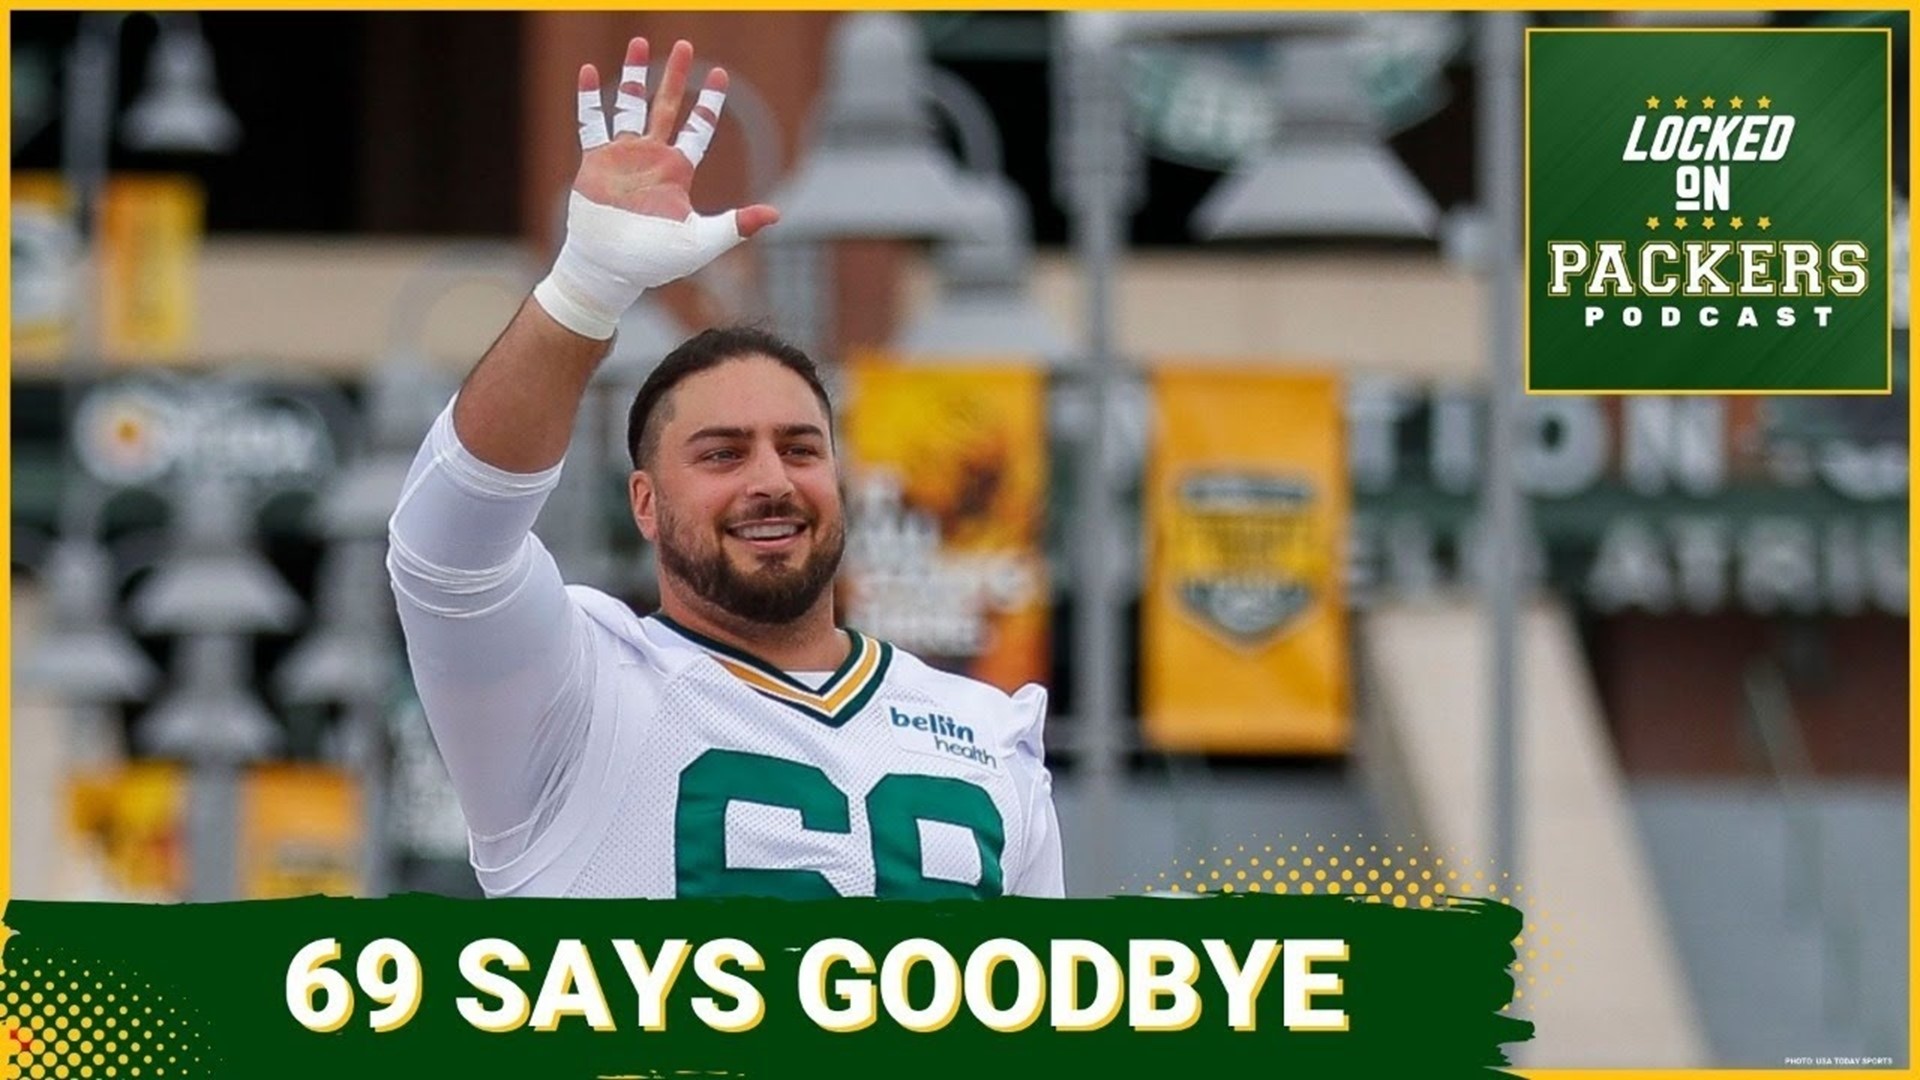 David Bakhtiari gave a heartfelt goodbye to the Packers on social media on Monday in a much-expected move.